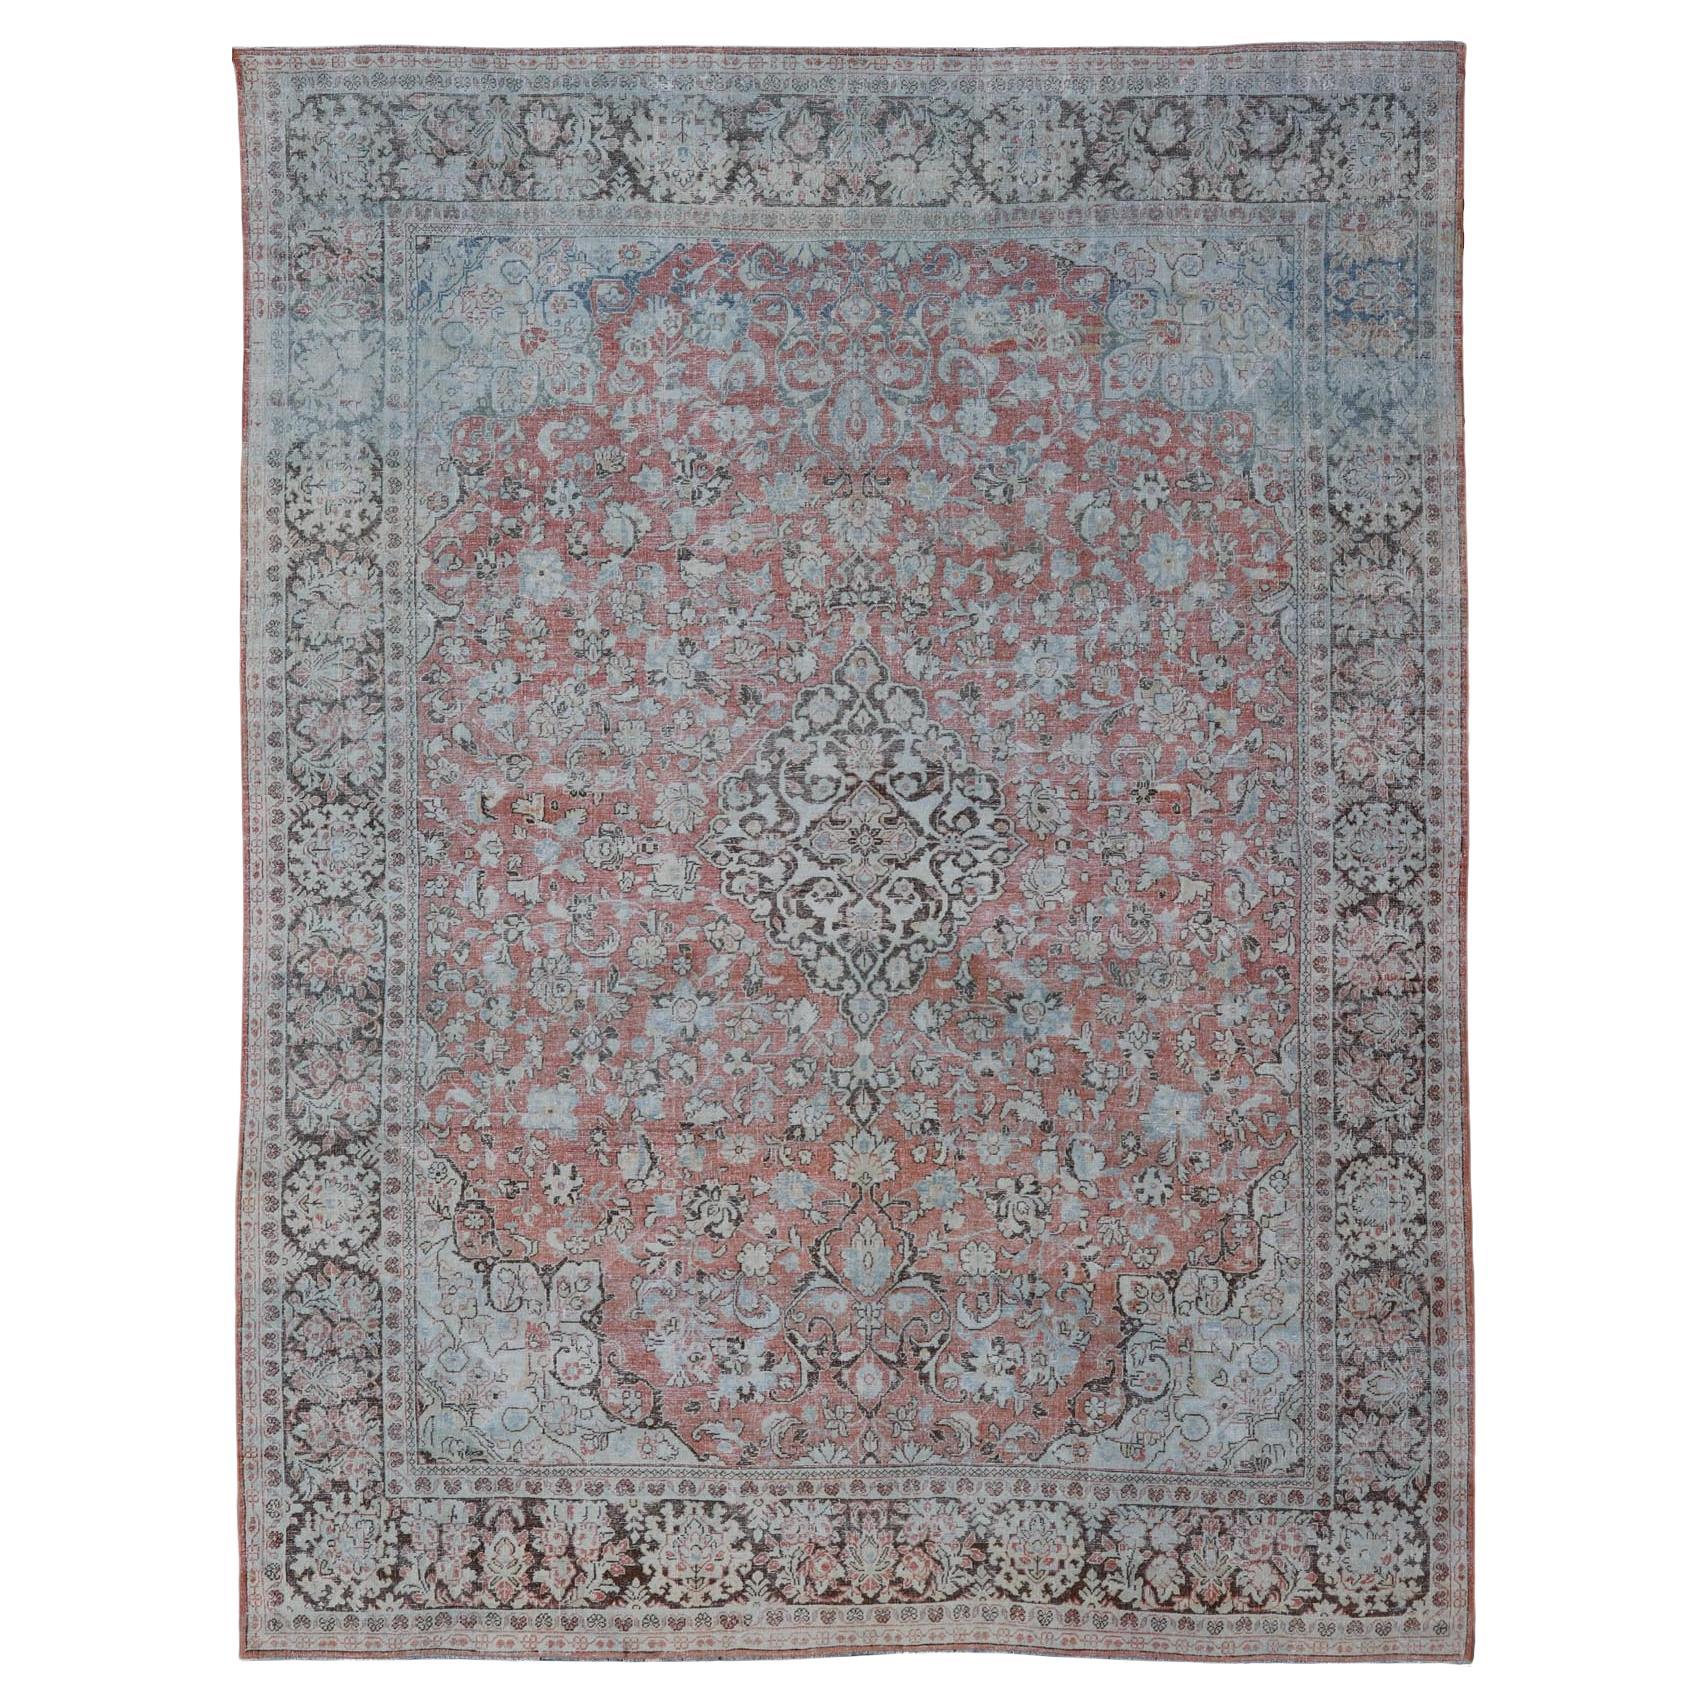 Distressed Antique Medallion Persian Mahal Rug in Faded Orange, Cream and Brown For Sale